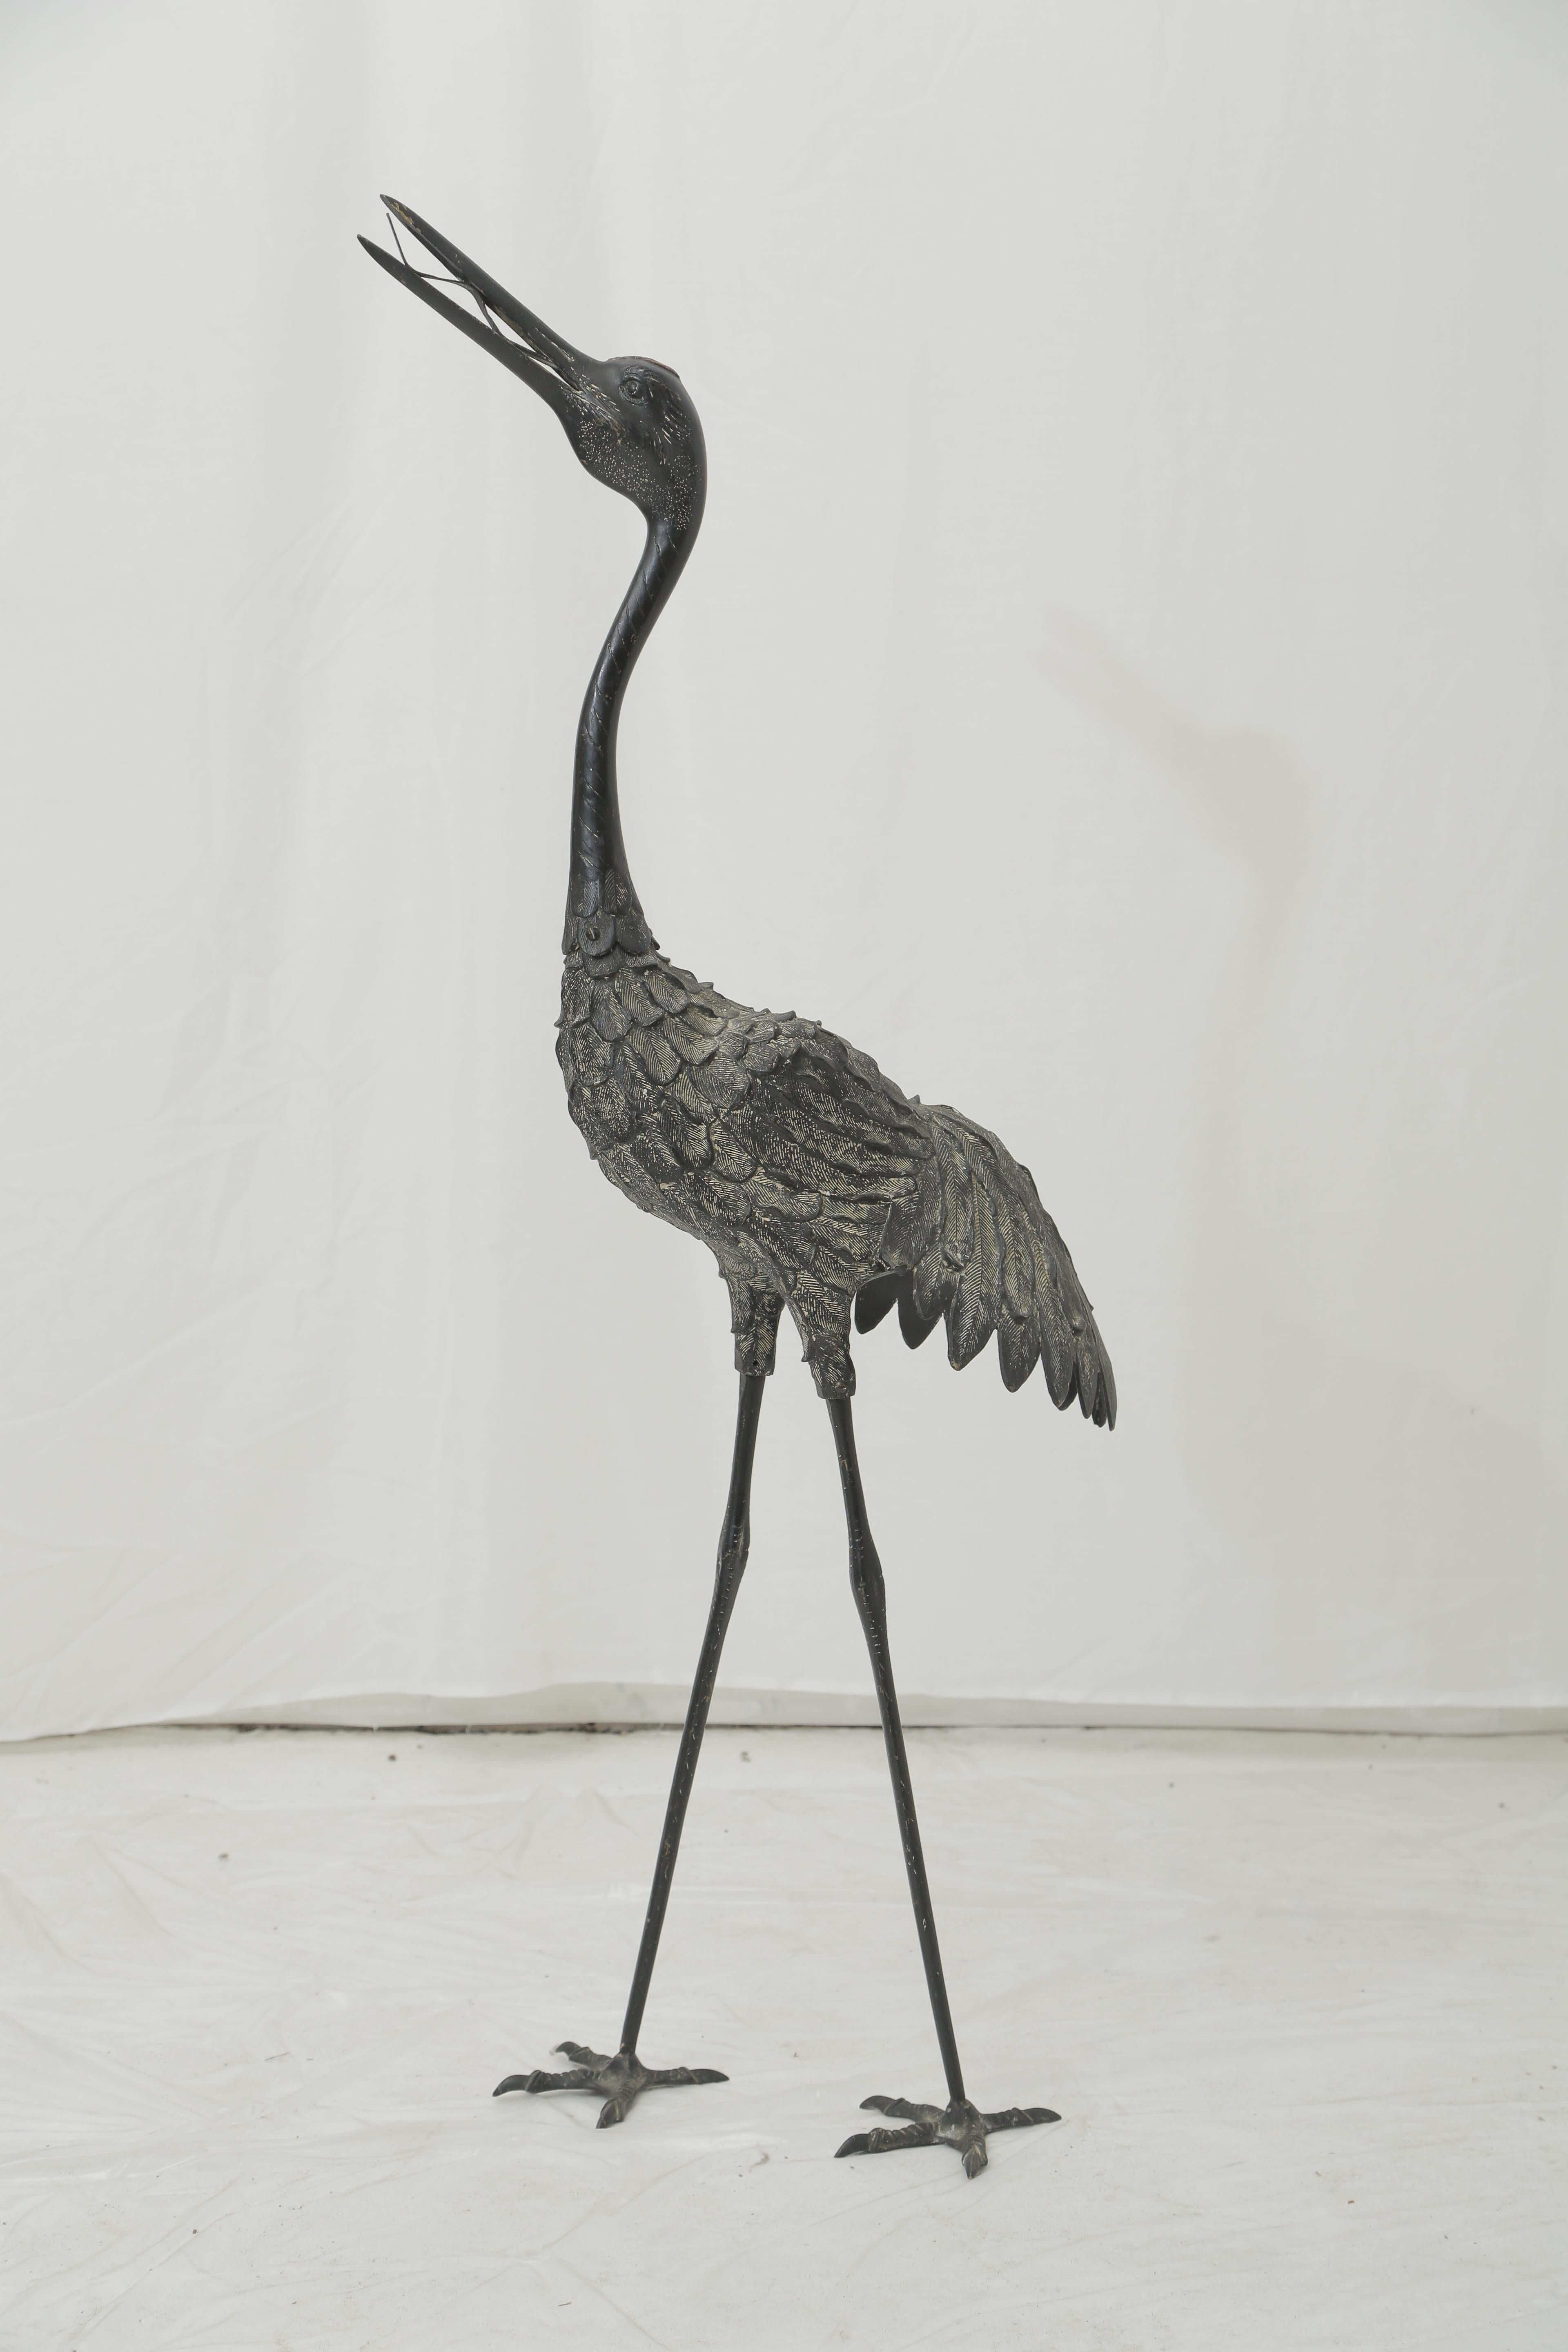 Cast Unique Bronze Sculpture of a Heron in Chinese Style